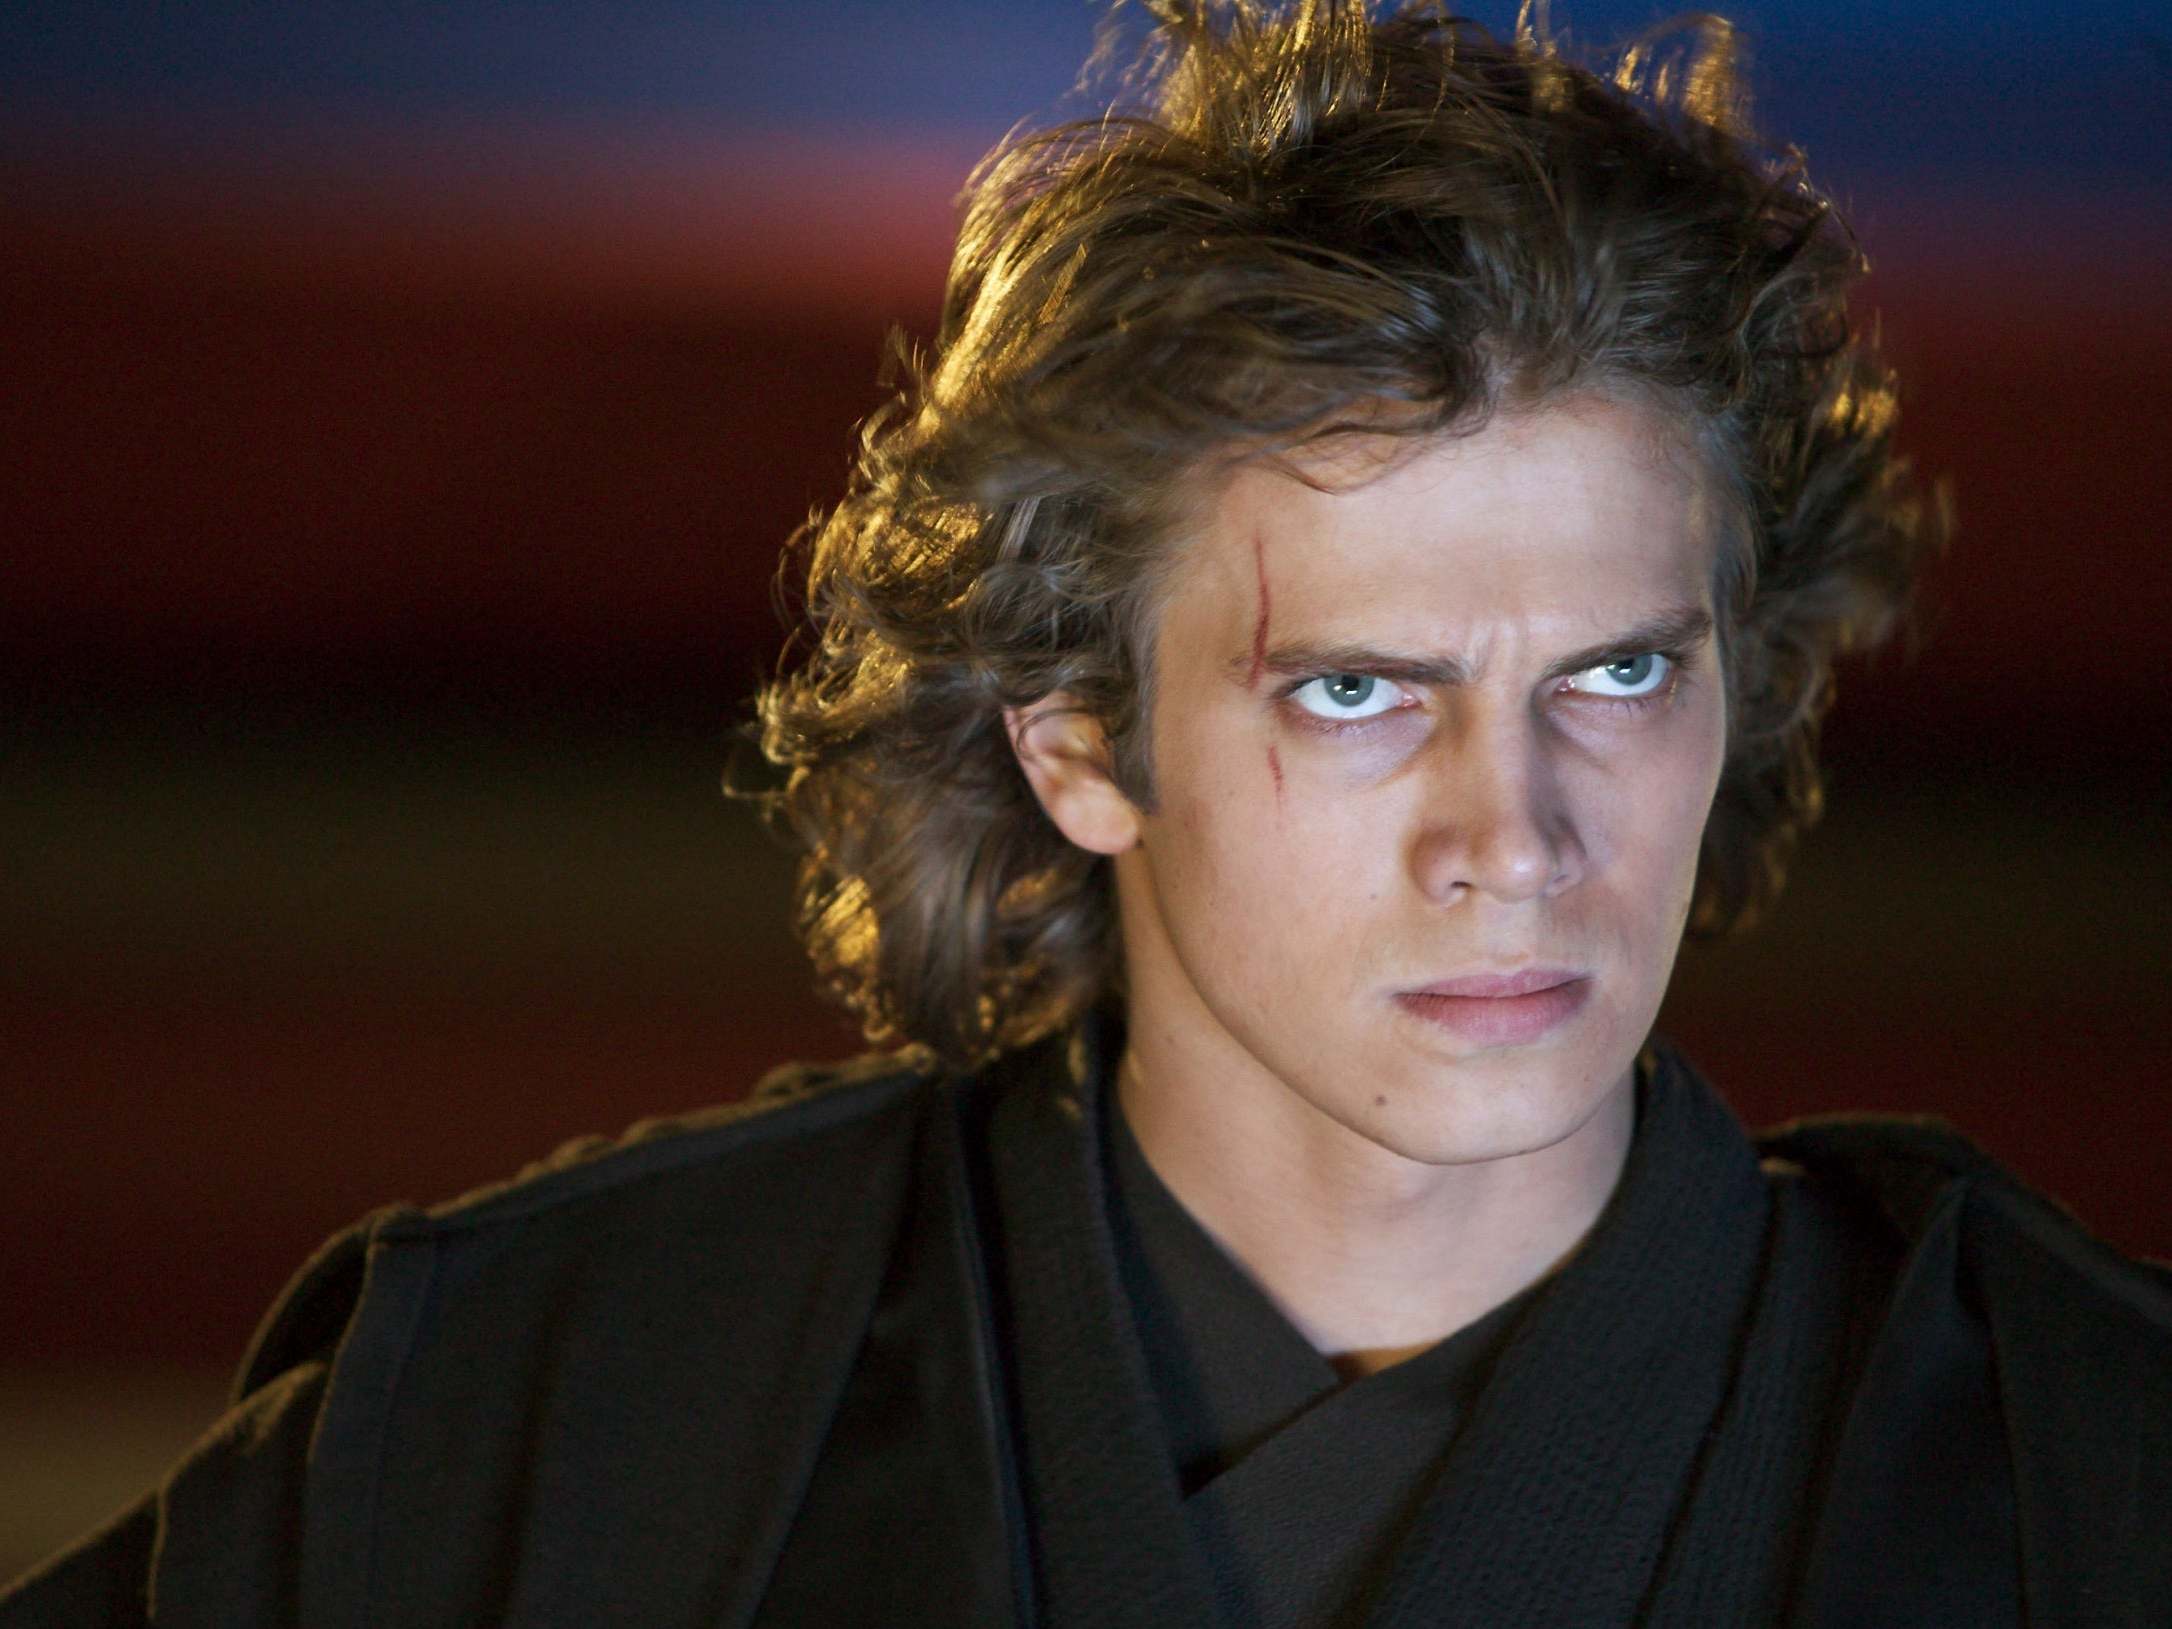 Hayden Christensen, who played Anakin, may have been saddled with some clunkers, but he could channel the character’s wild confusion with flair